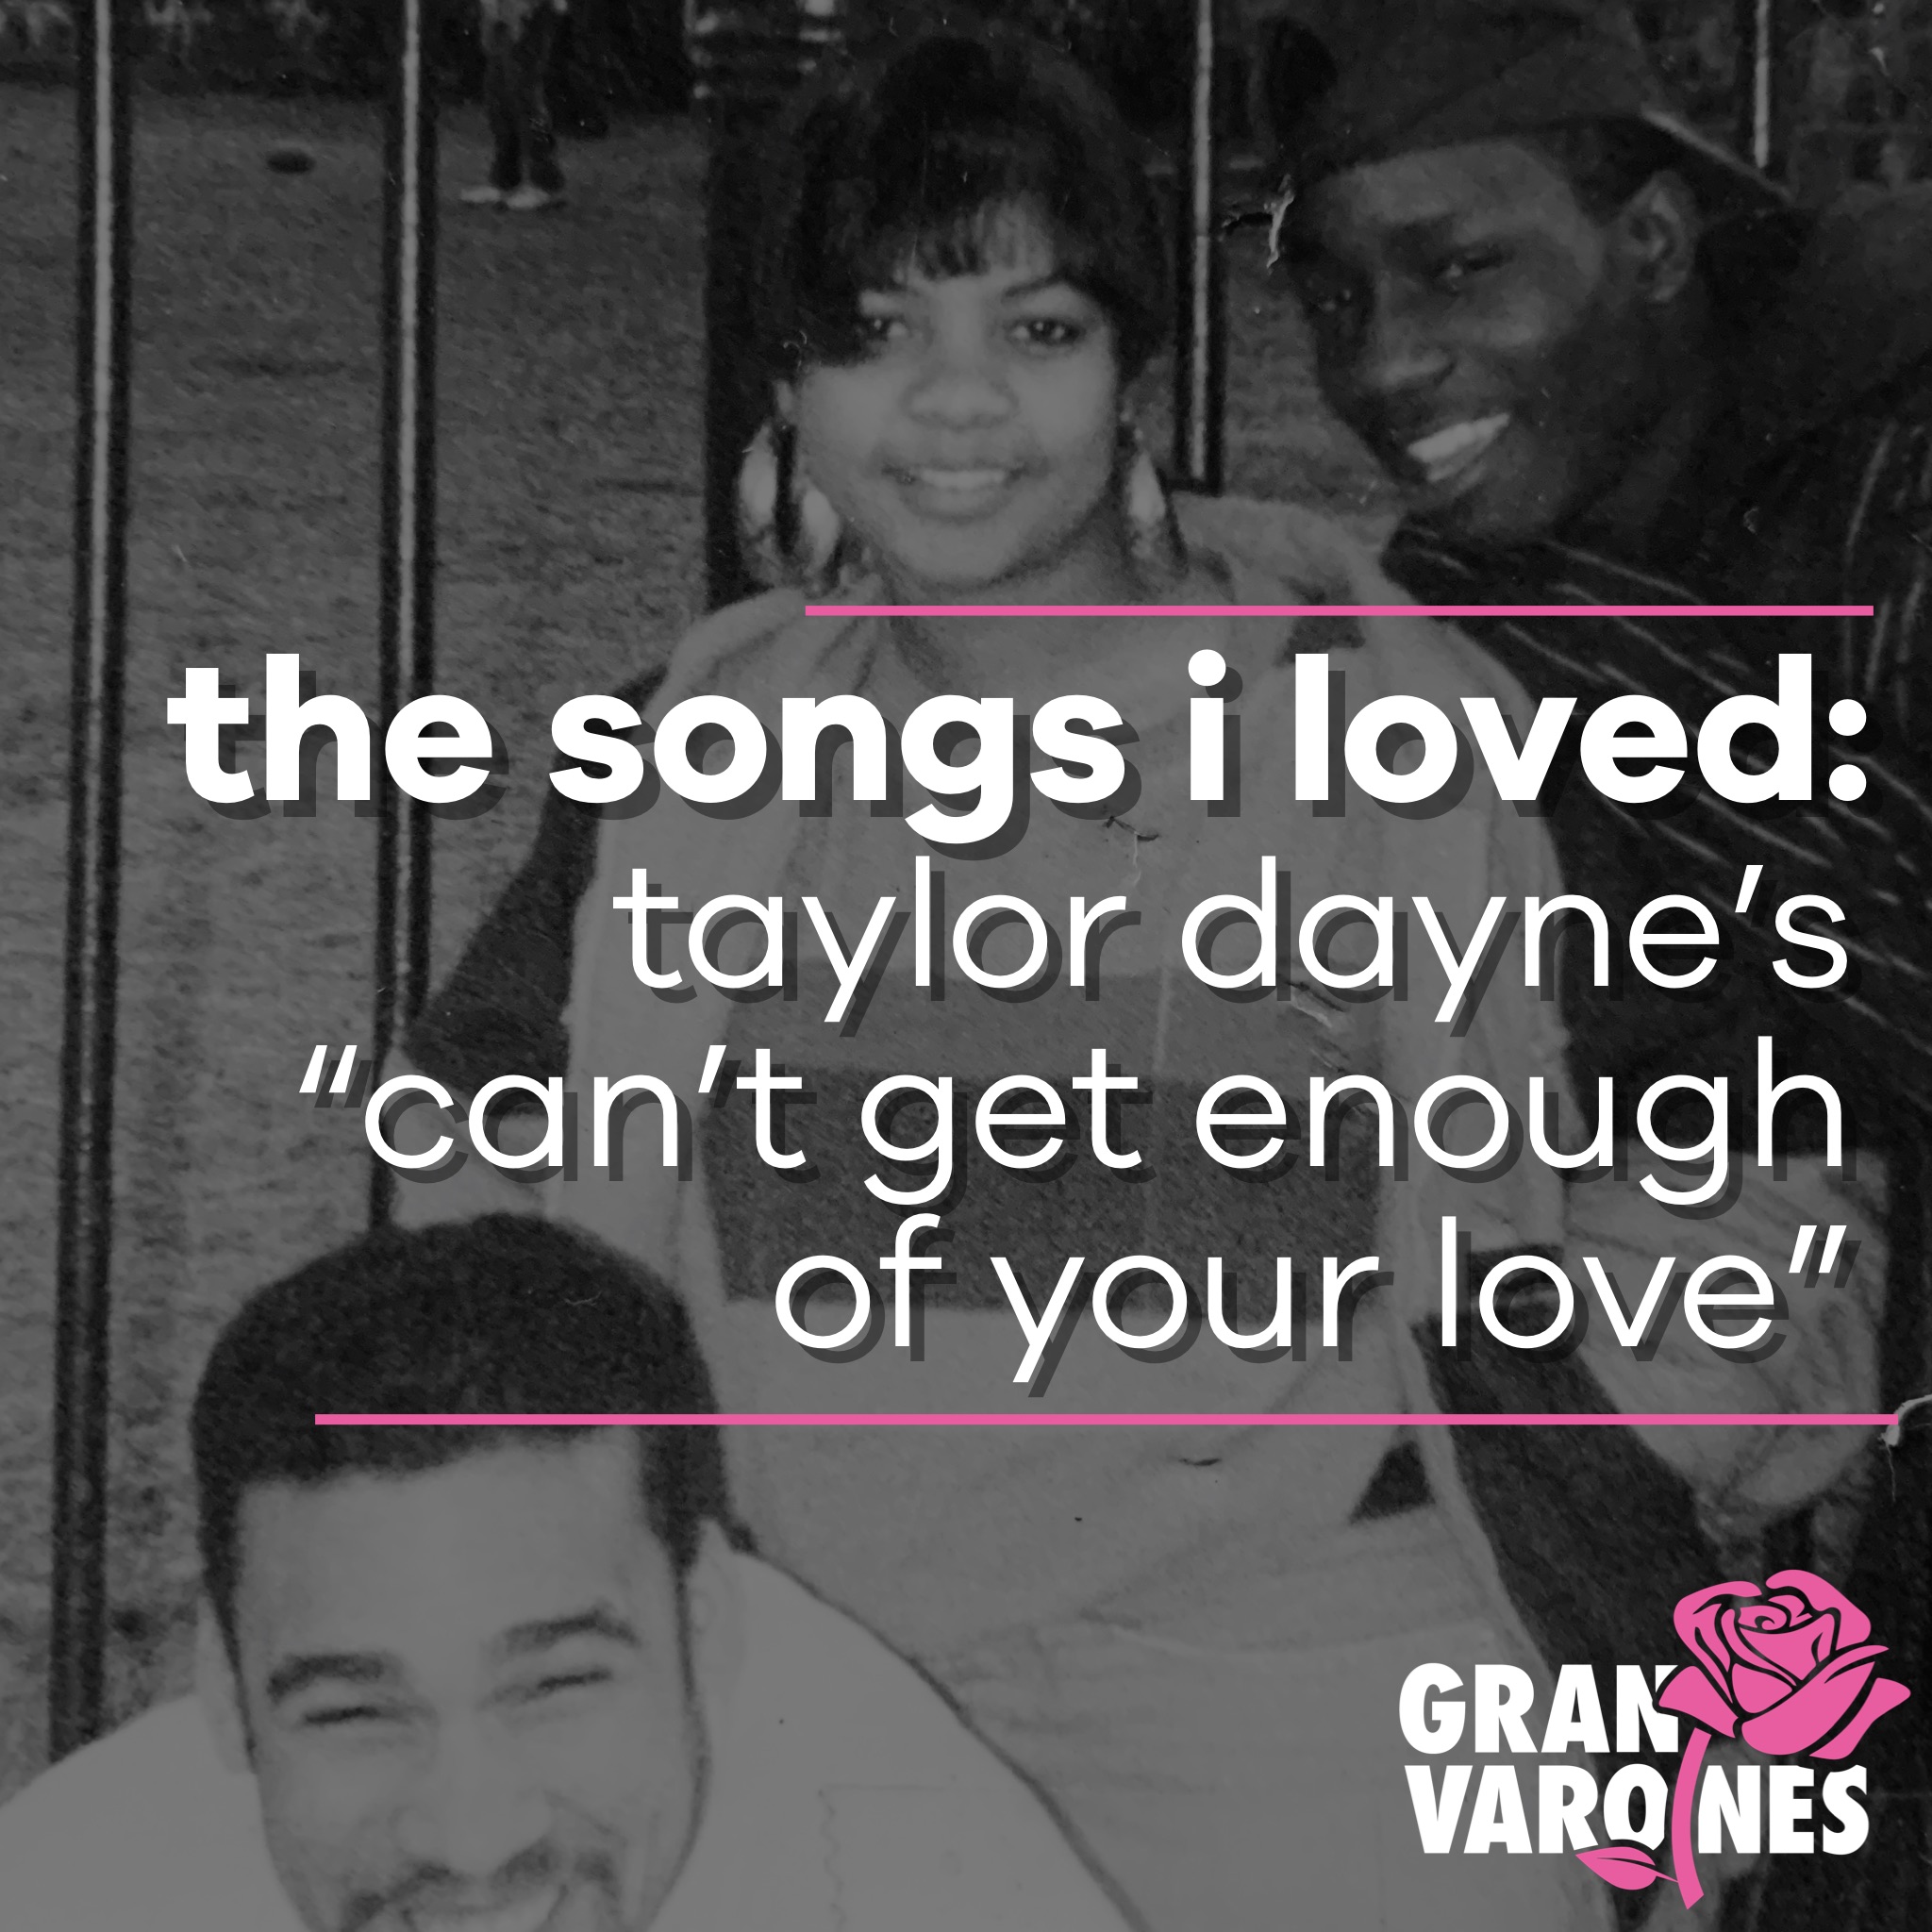 Songs That I Loved: Taylor Dayne’s “Can’t Get Enough of Your Love”